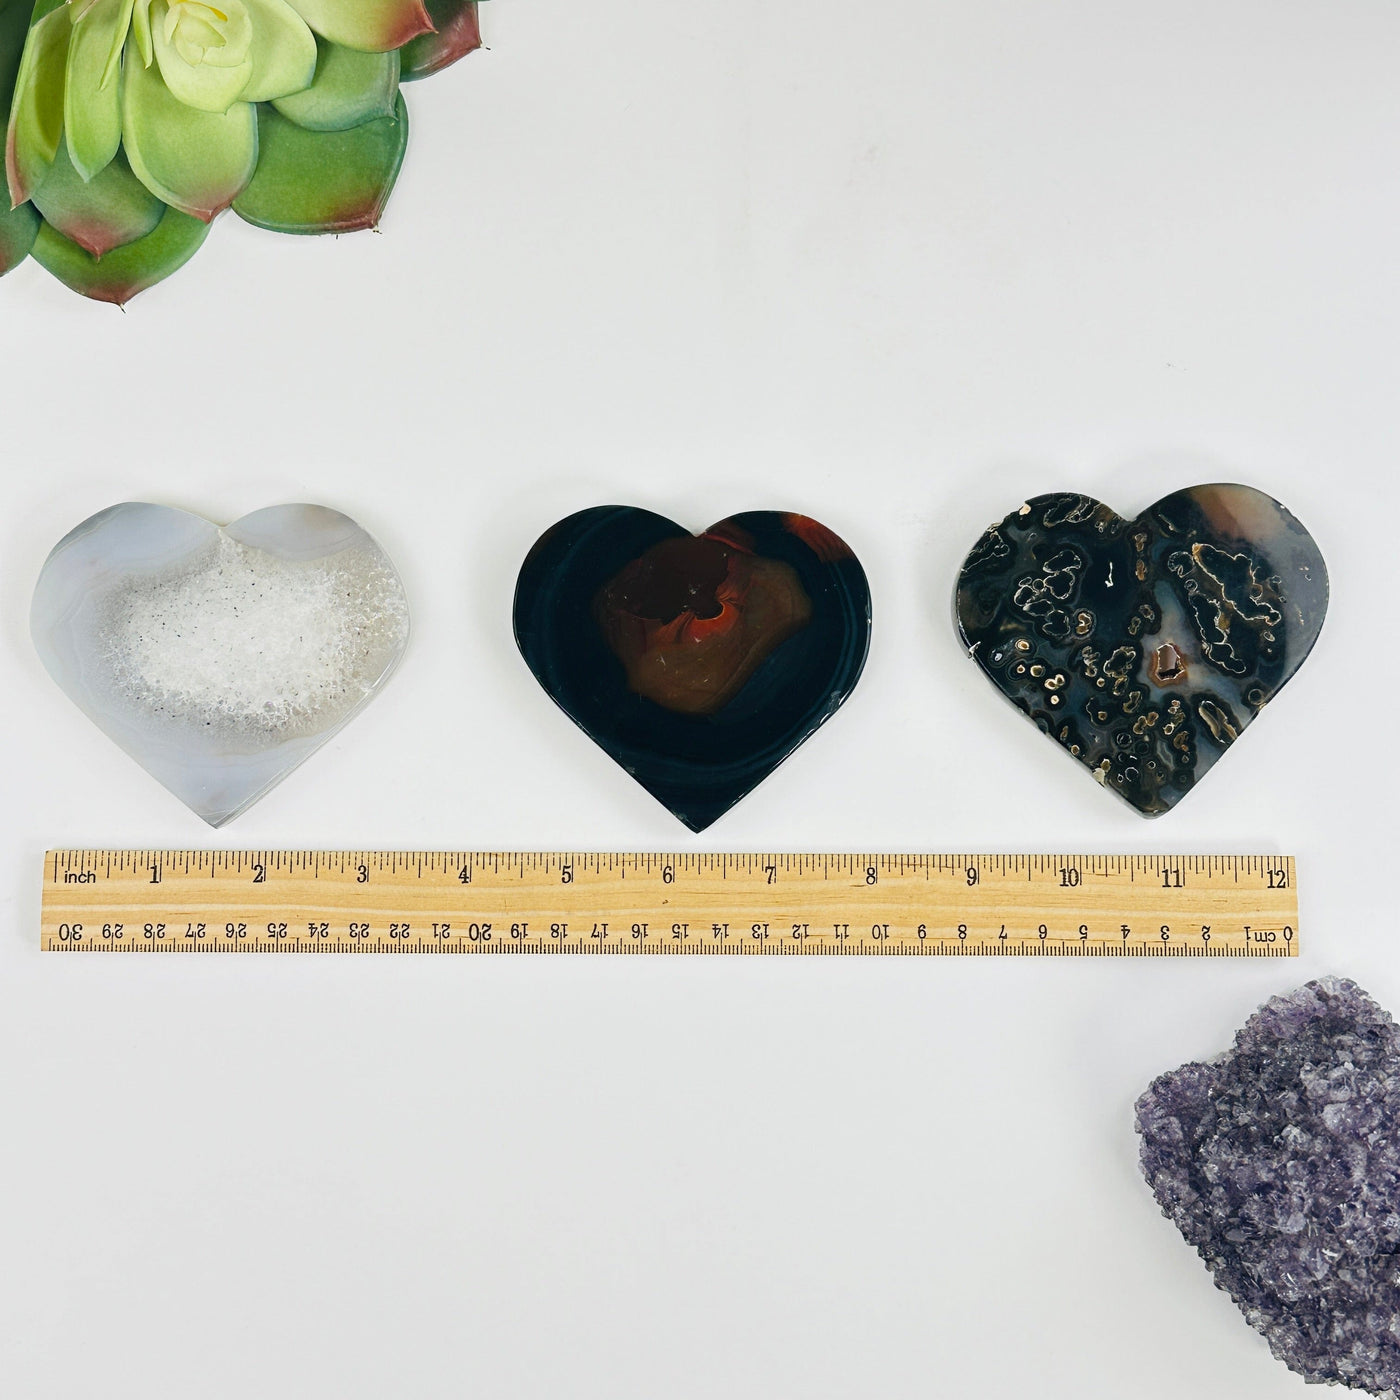 all variants of Natural Agate Heart Slices next to a ruler for size reference